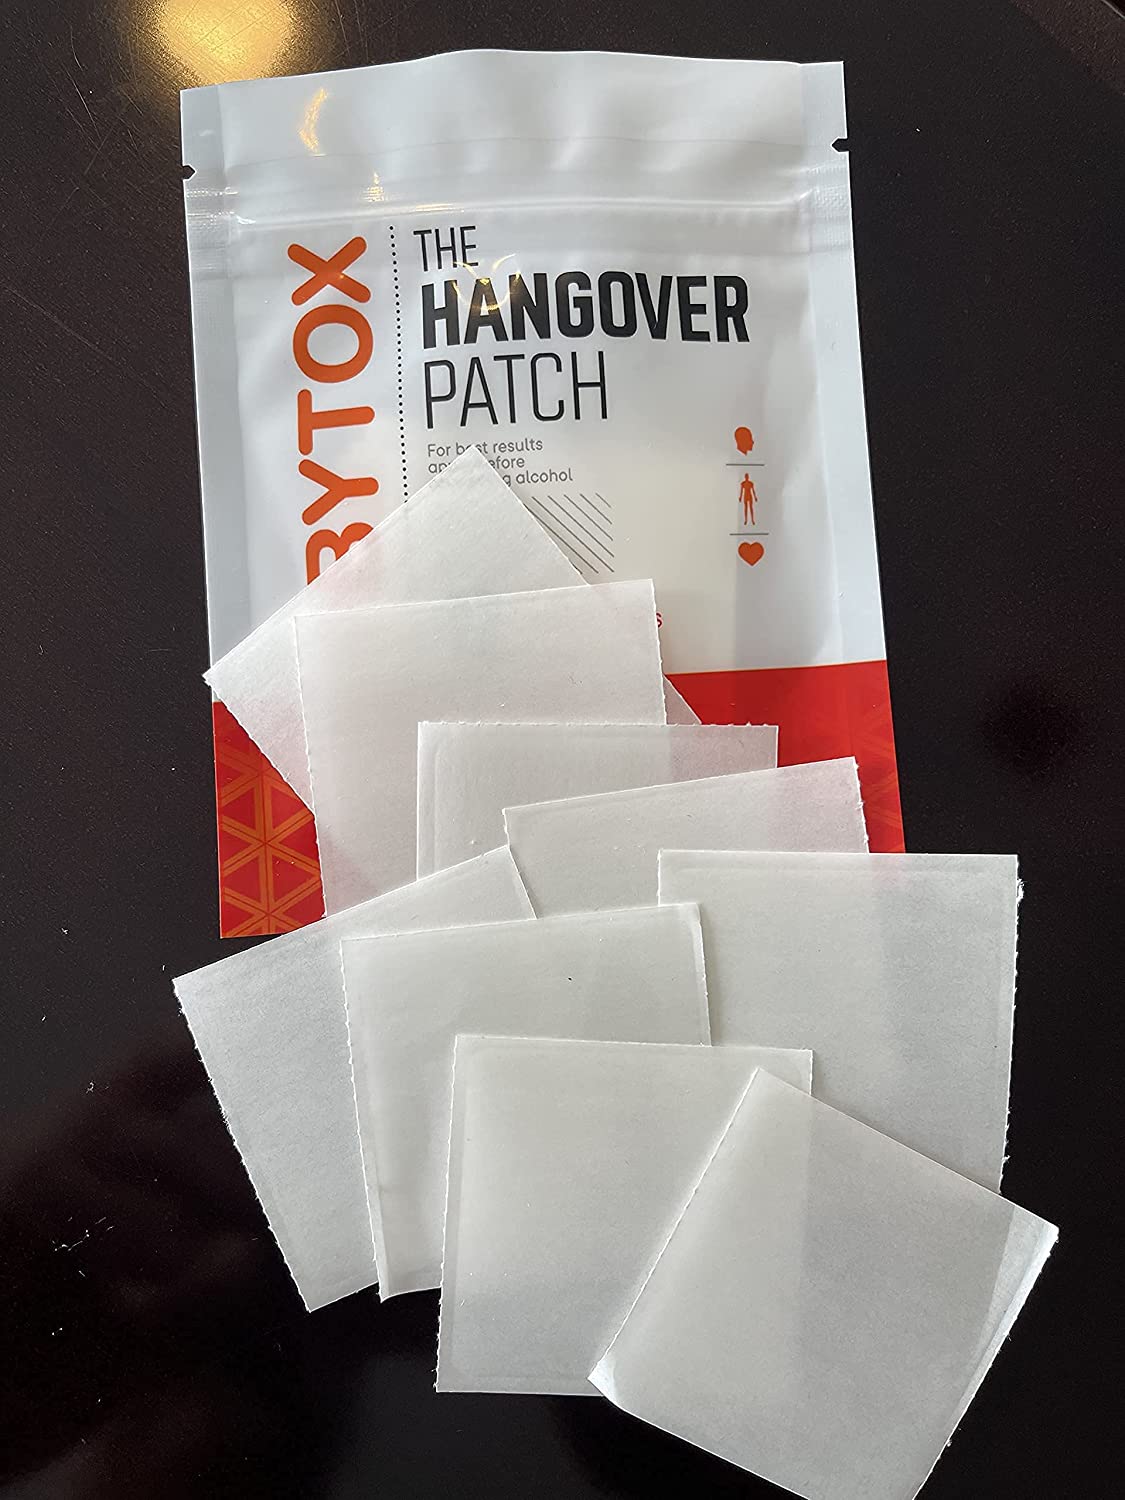 Hangover 'cure' Bytox patch goes on sale in the UK - Mirror Online